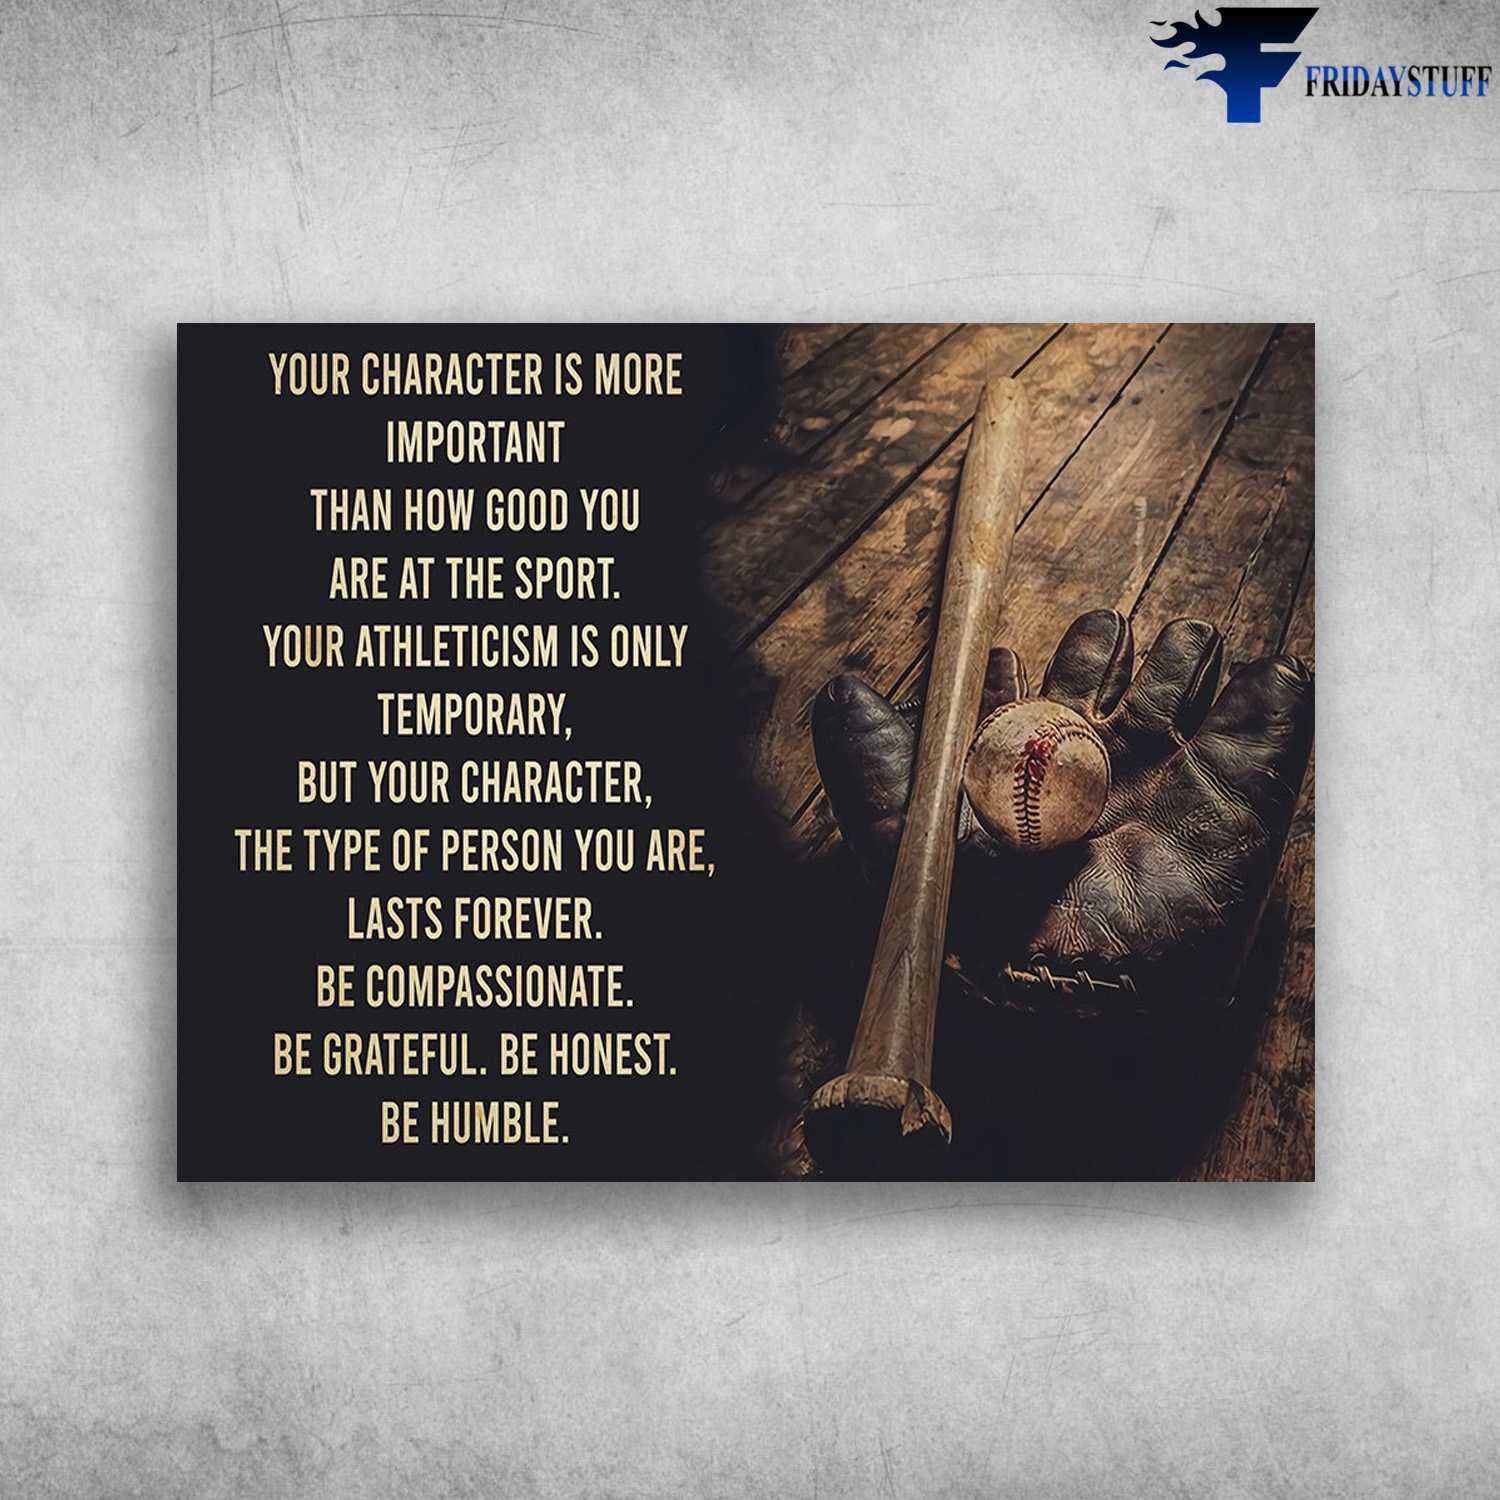 Baseball Poster, Your Character Is More Important, Than How Good You Are At The Sport, Your Athleticism Is Only Temporary